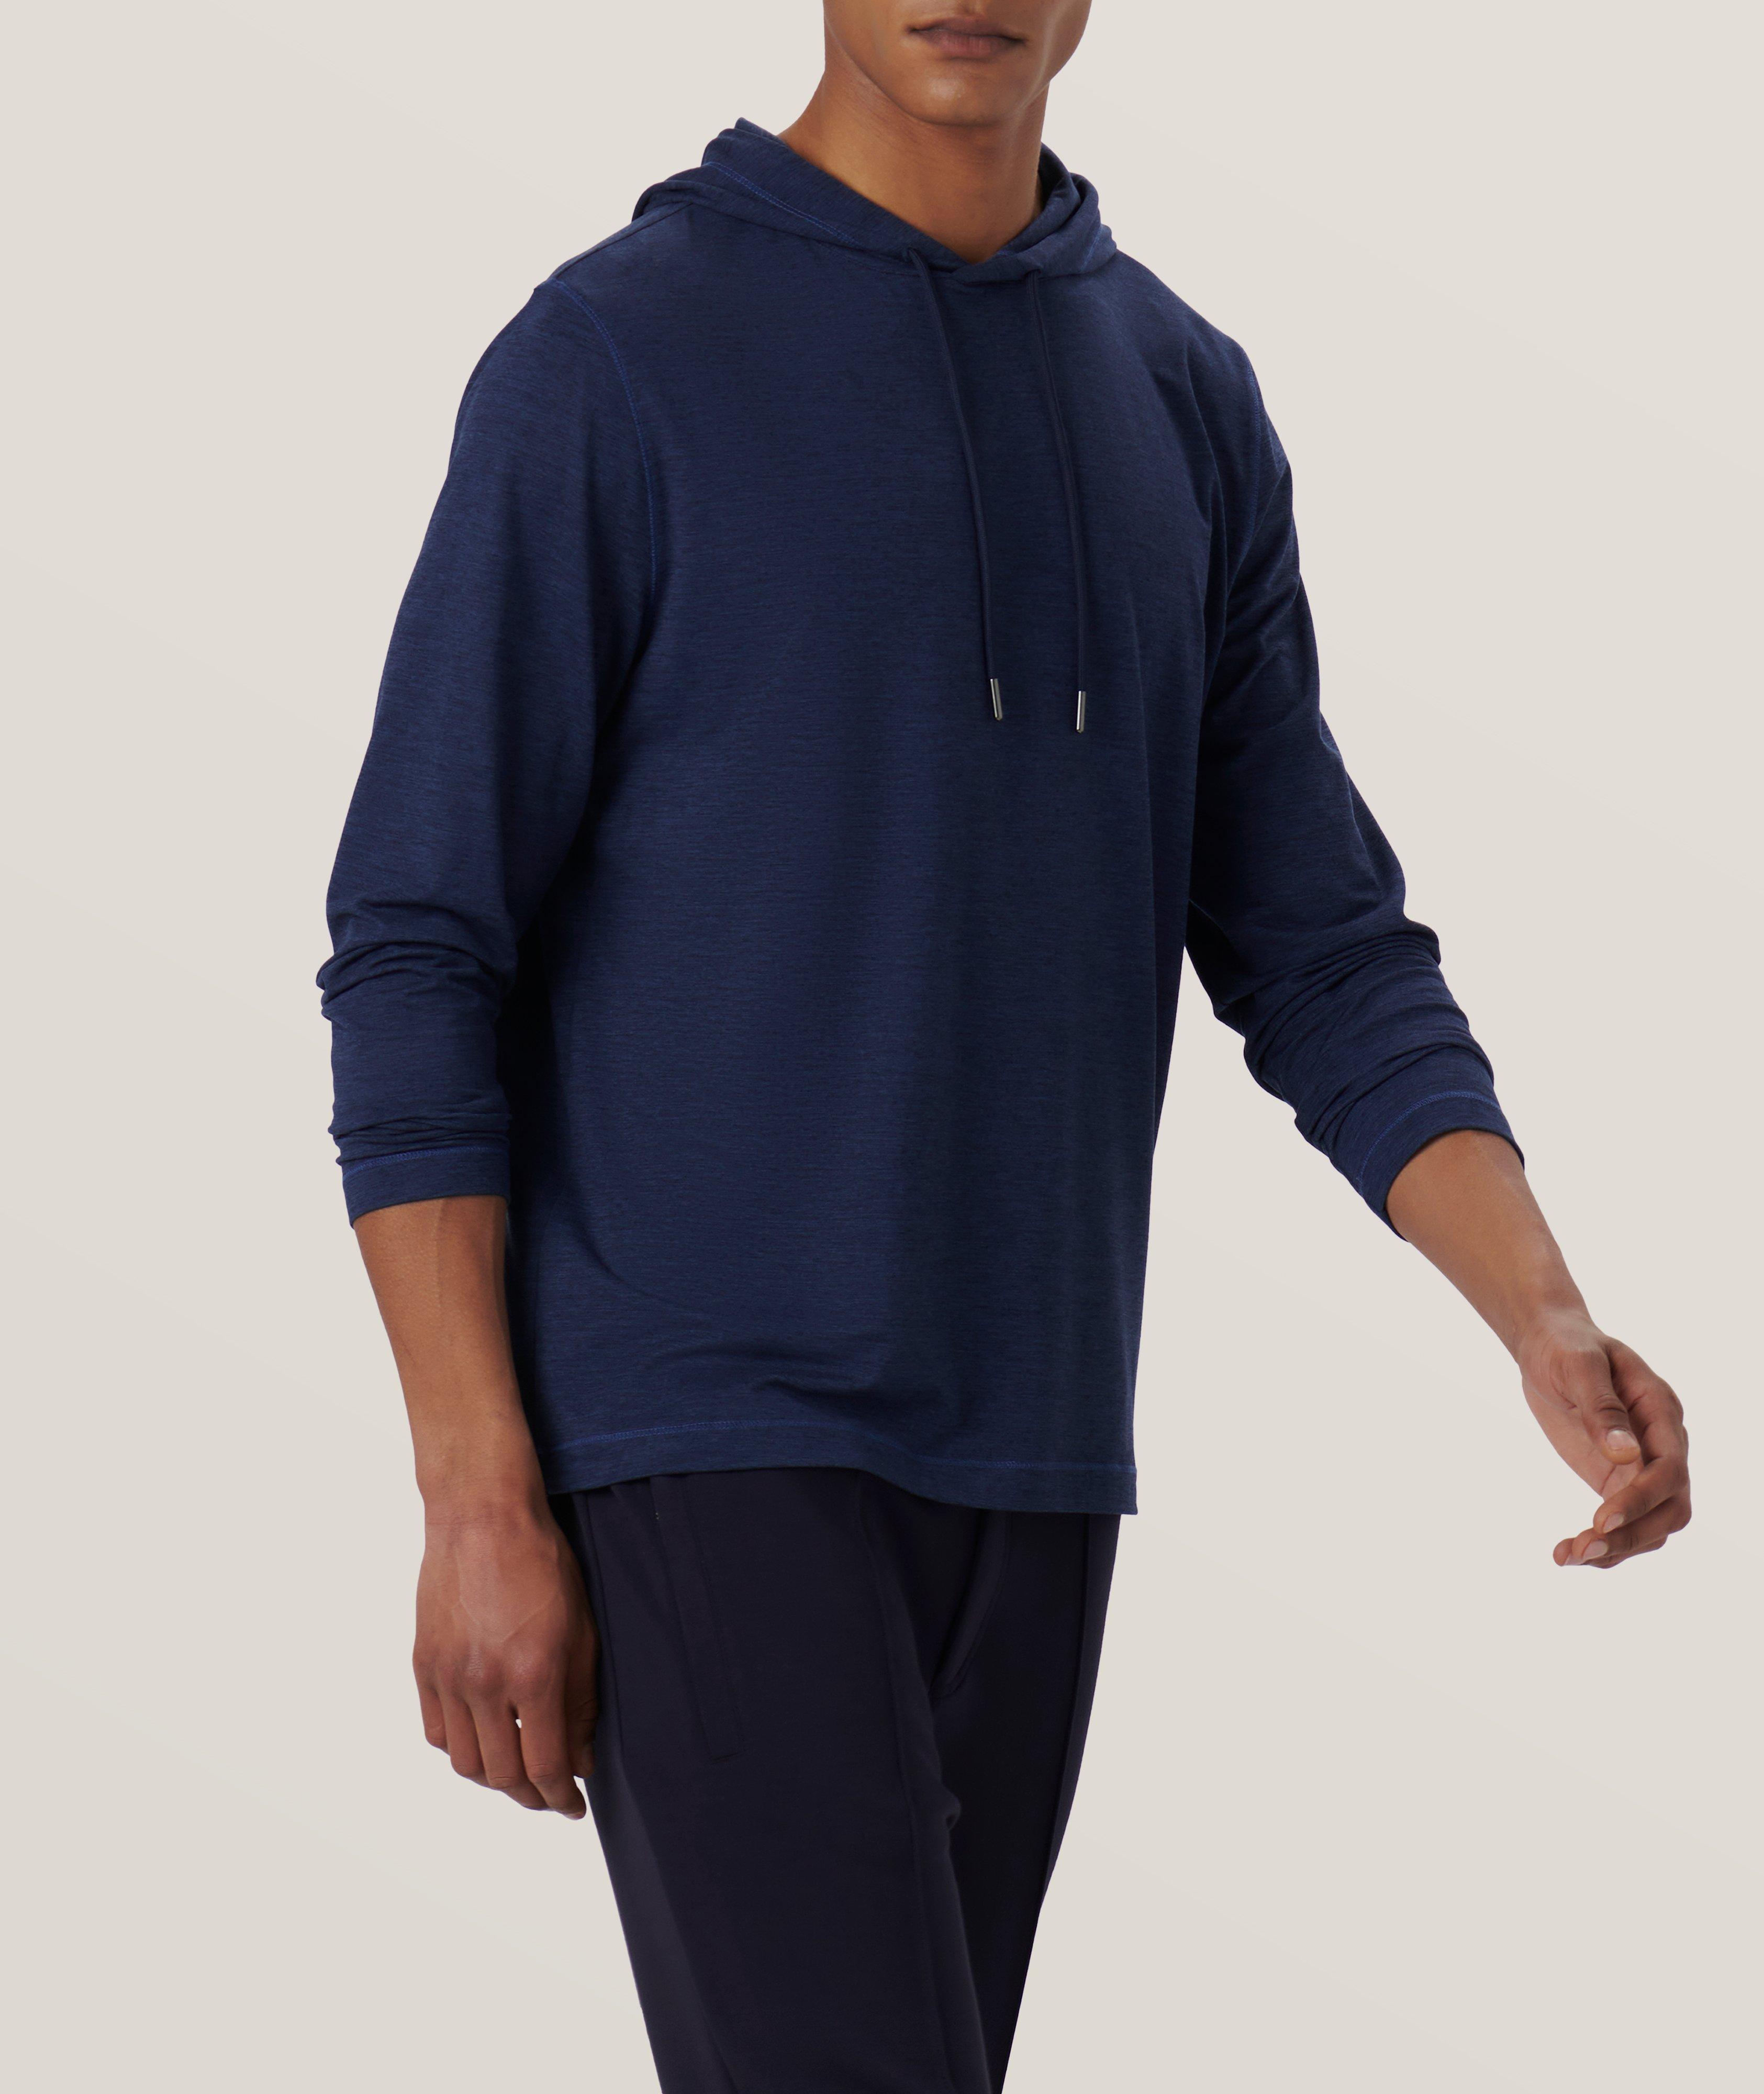 UV50 Performance Stretch-Fabric Hooded Sweater image 3